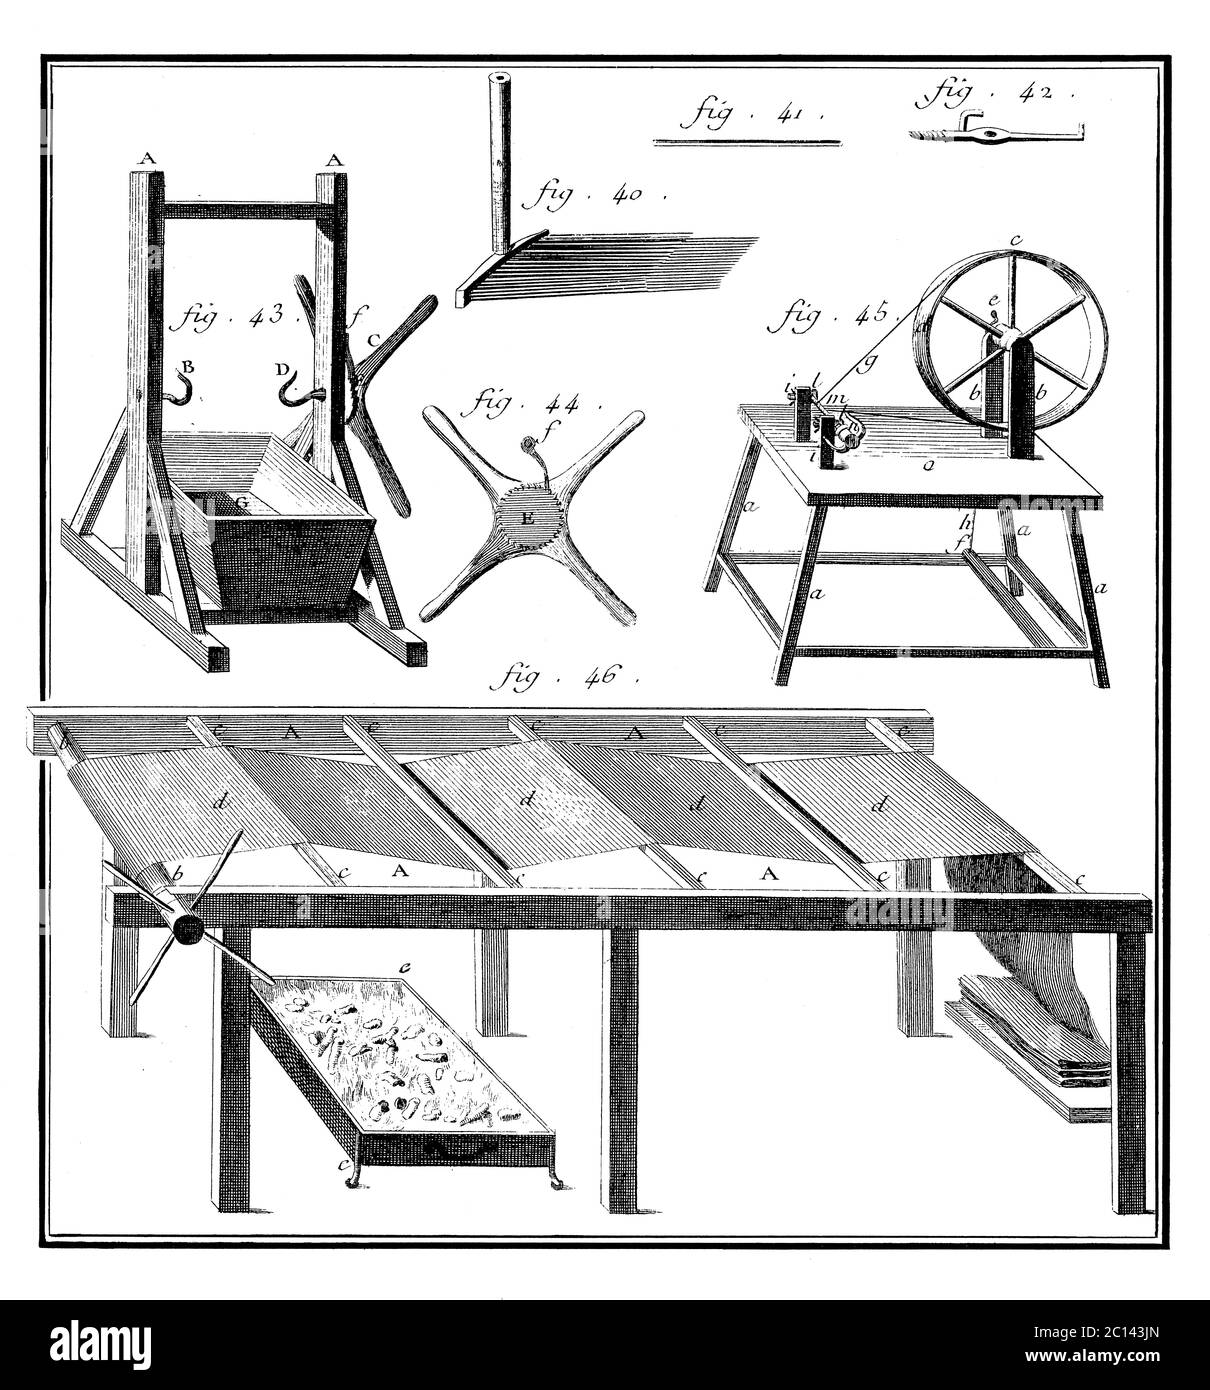 Antique illustration of combining and finishing devices: tube for washing and wringing woolens (fig. 43), spinning wheel (fig. 45), frame for finishin Stock Photo